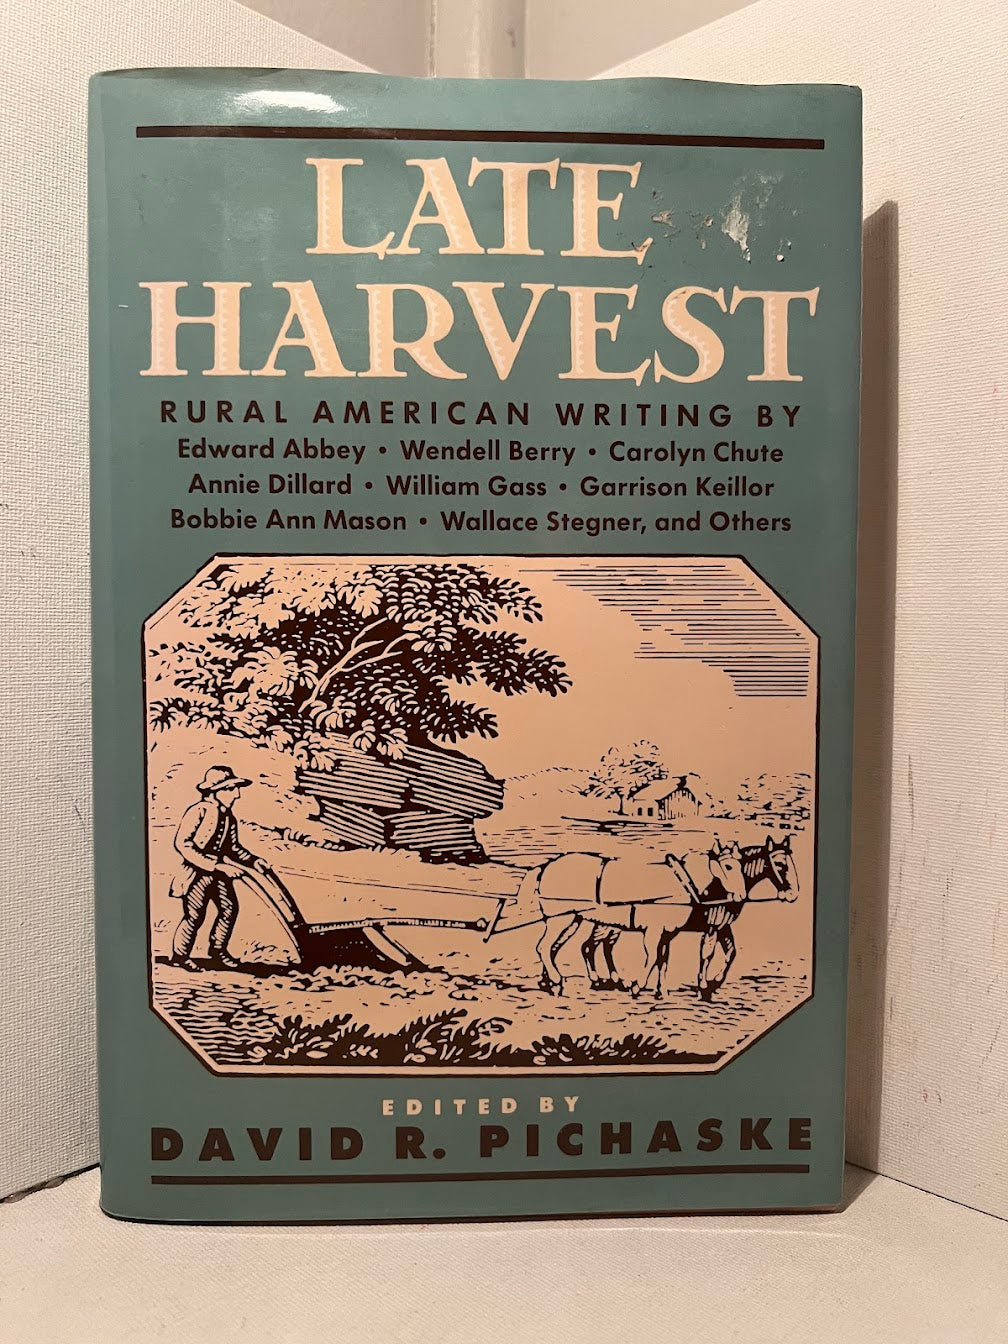 Late Harvest: Rural American Writing edited by David R. Pichaske